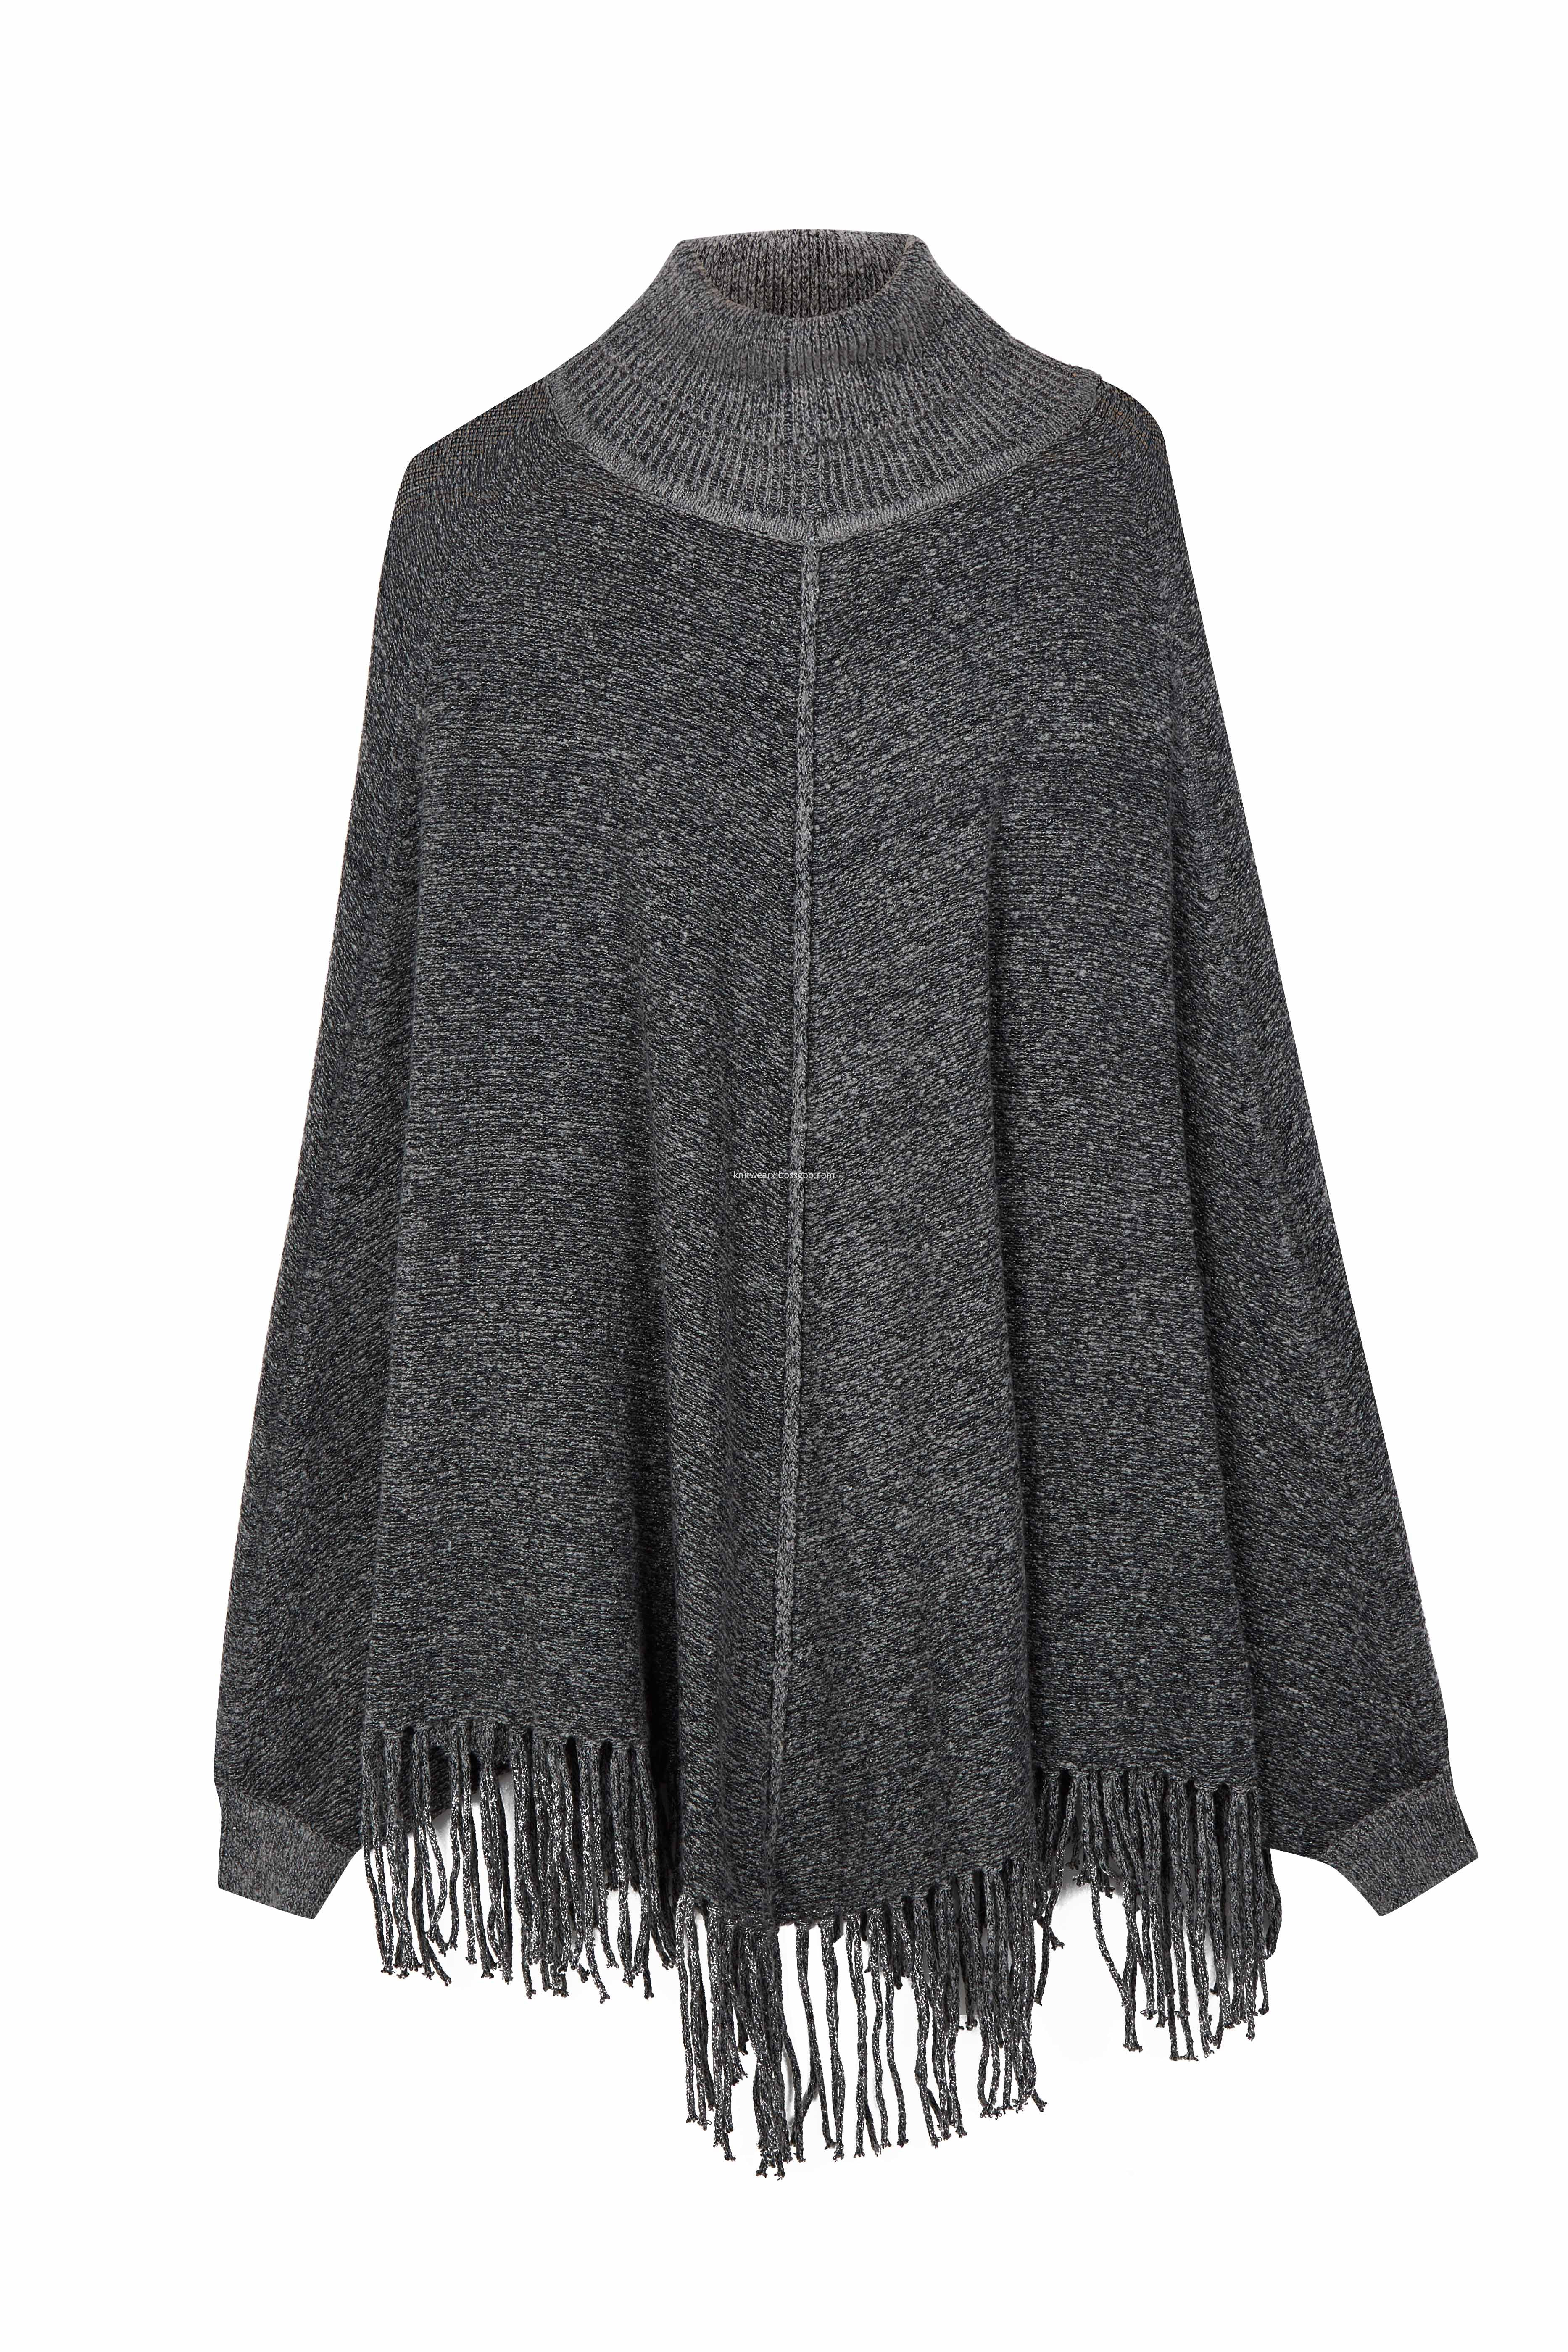 Women's Knitted Stretchable Turtleneck Tassels Poncho Caps